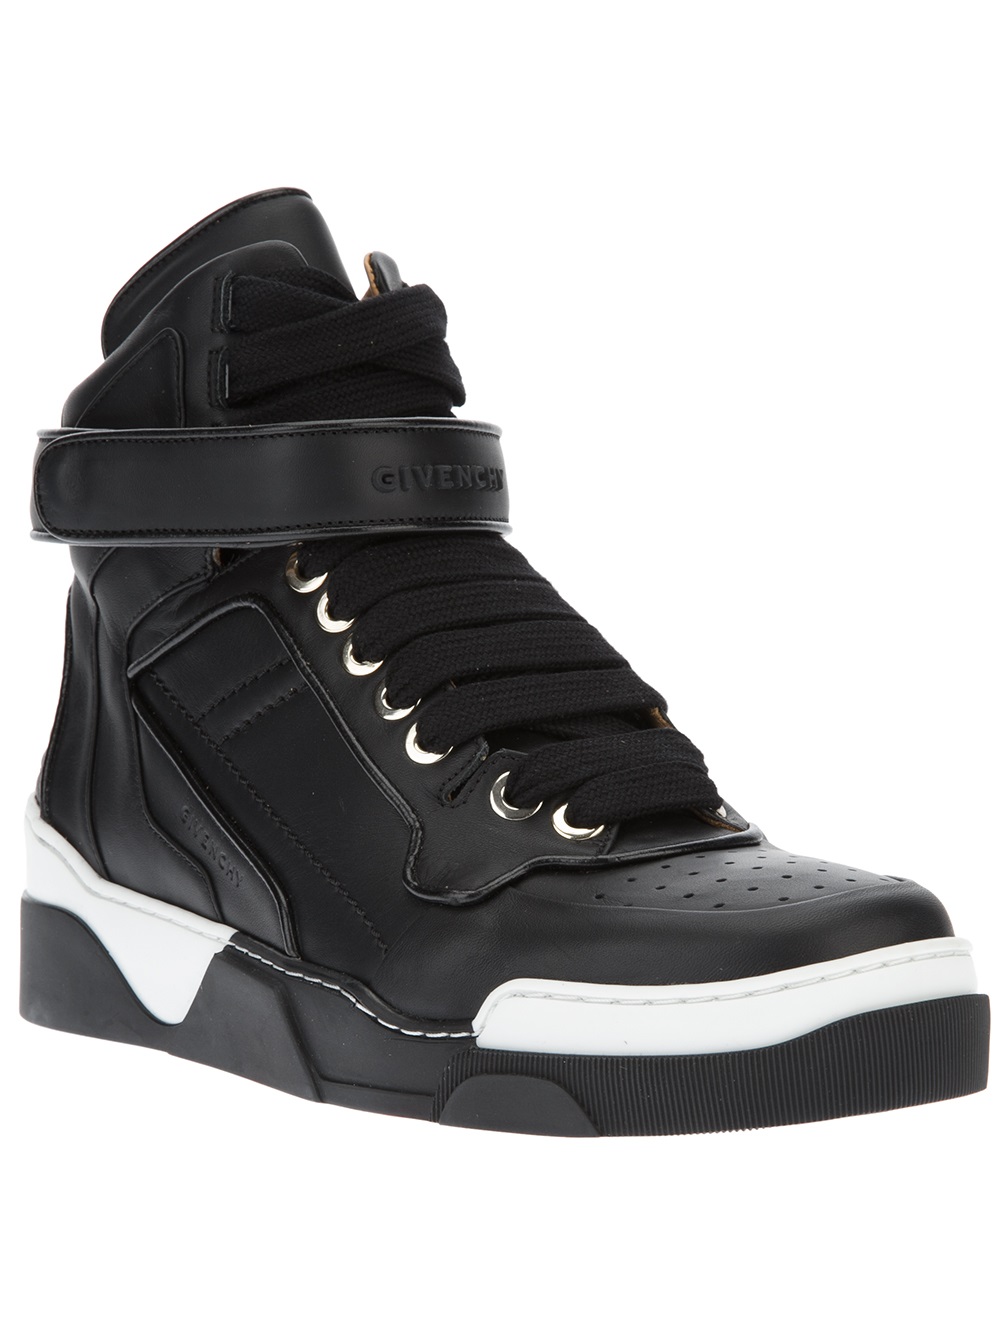 Lyst - Givenchy Hitop Trainer in Black for Men